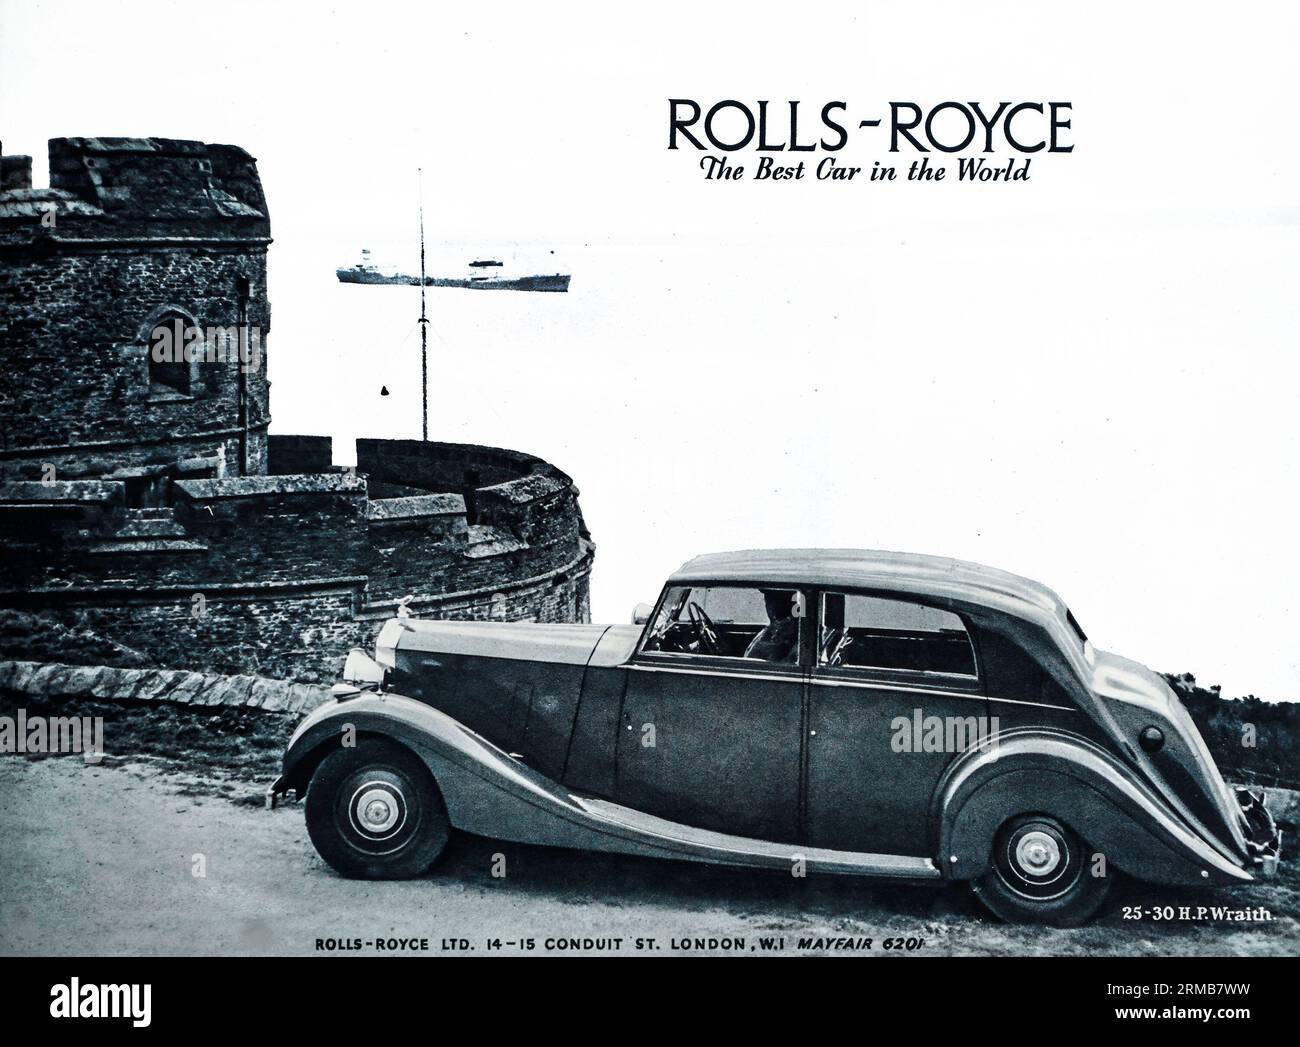 A 1941 wartime advertisement for Rolls Royce, ‘The Best Car in the World”. Rolls Royce  gave their address as Conduit Street, London. Stock Photo